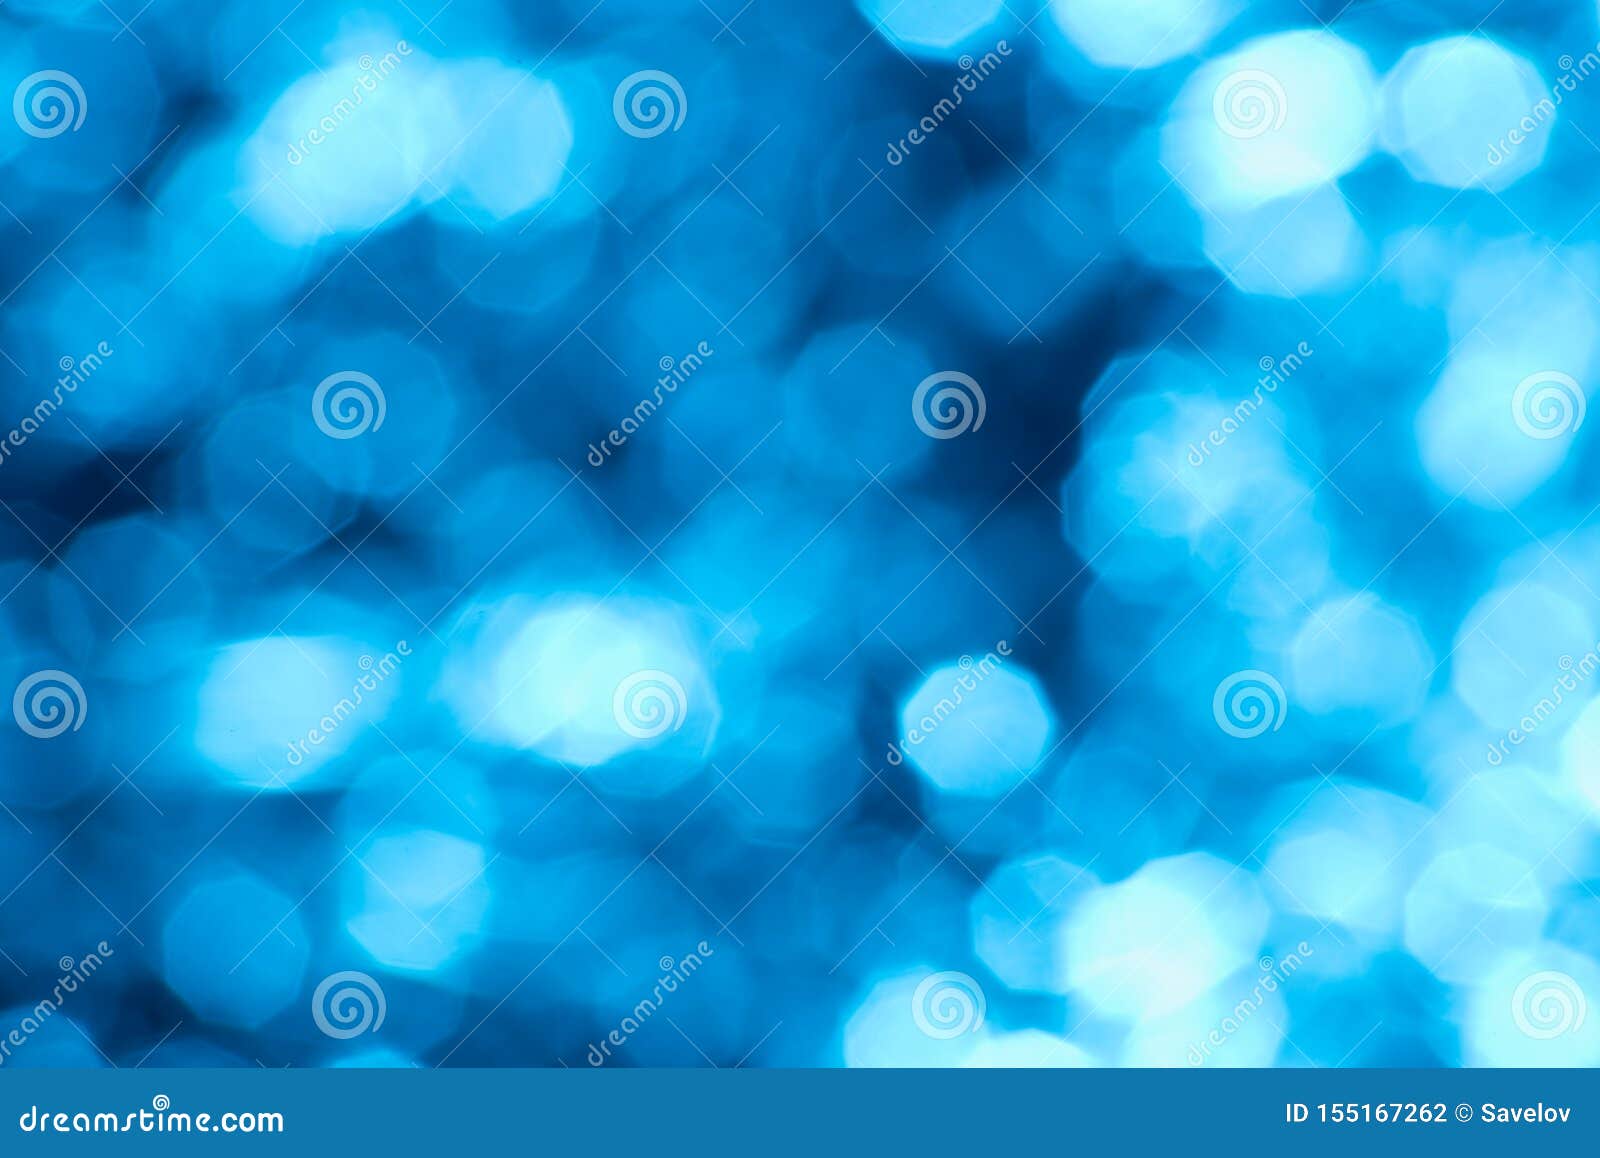 Blue Glowing Blurred Background with Bokeh Stock Photo - Image of magic,  blurred: 155167262